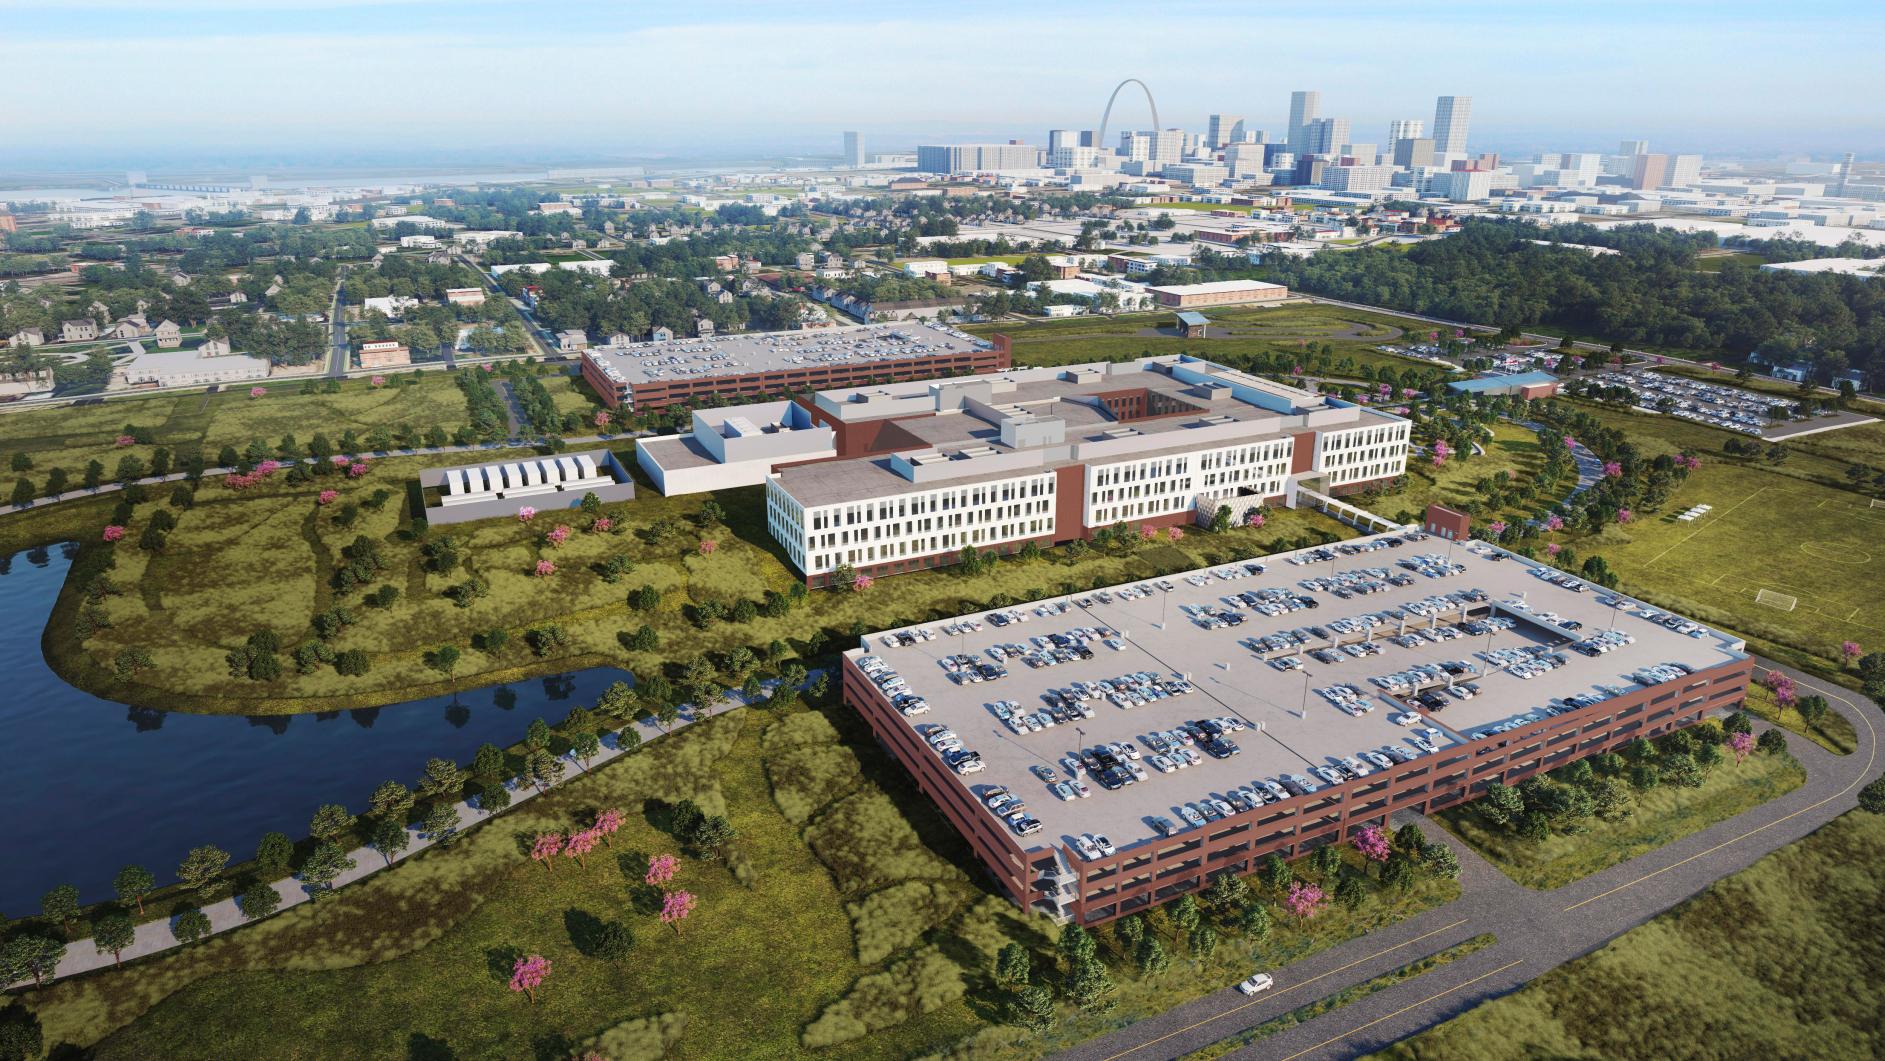 The U.S. Army Corps of Engineers and the National Geospatial-Intelligence Agency (NGA) reveal concept renderings for the Next NGA West (N2W) campus from the design-build team McCarthy HITT winning proposal. The entirety of the campus is anticipated to be